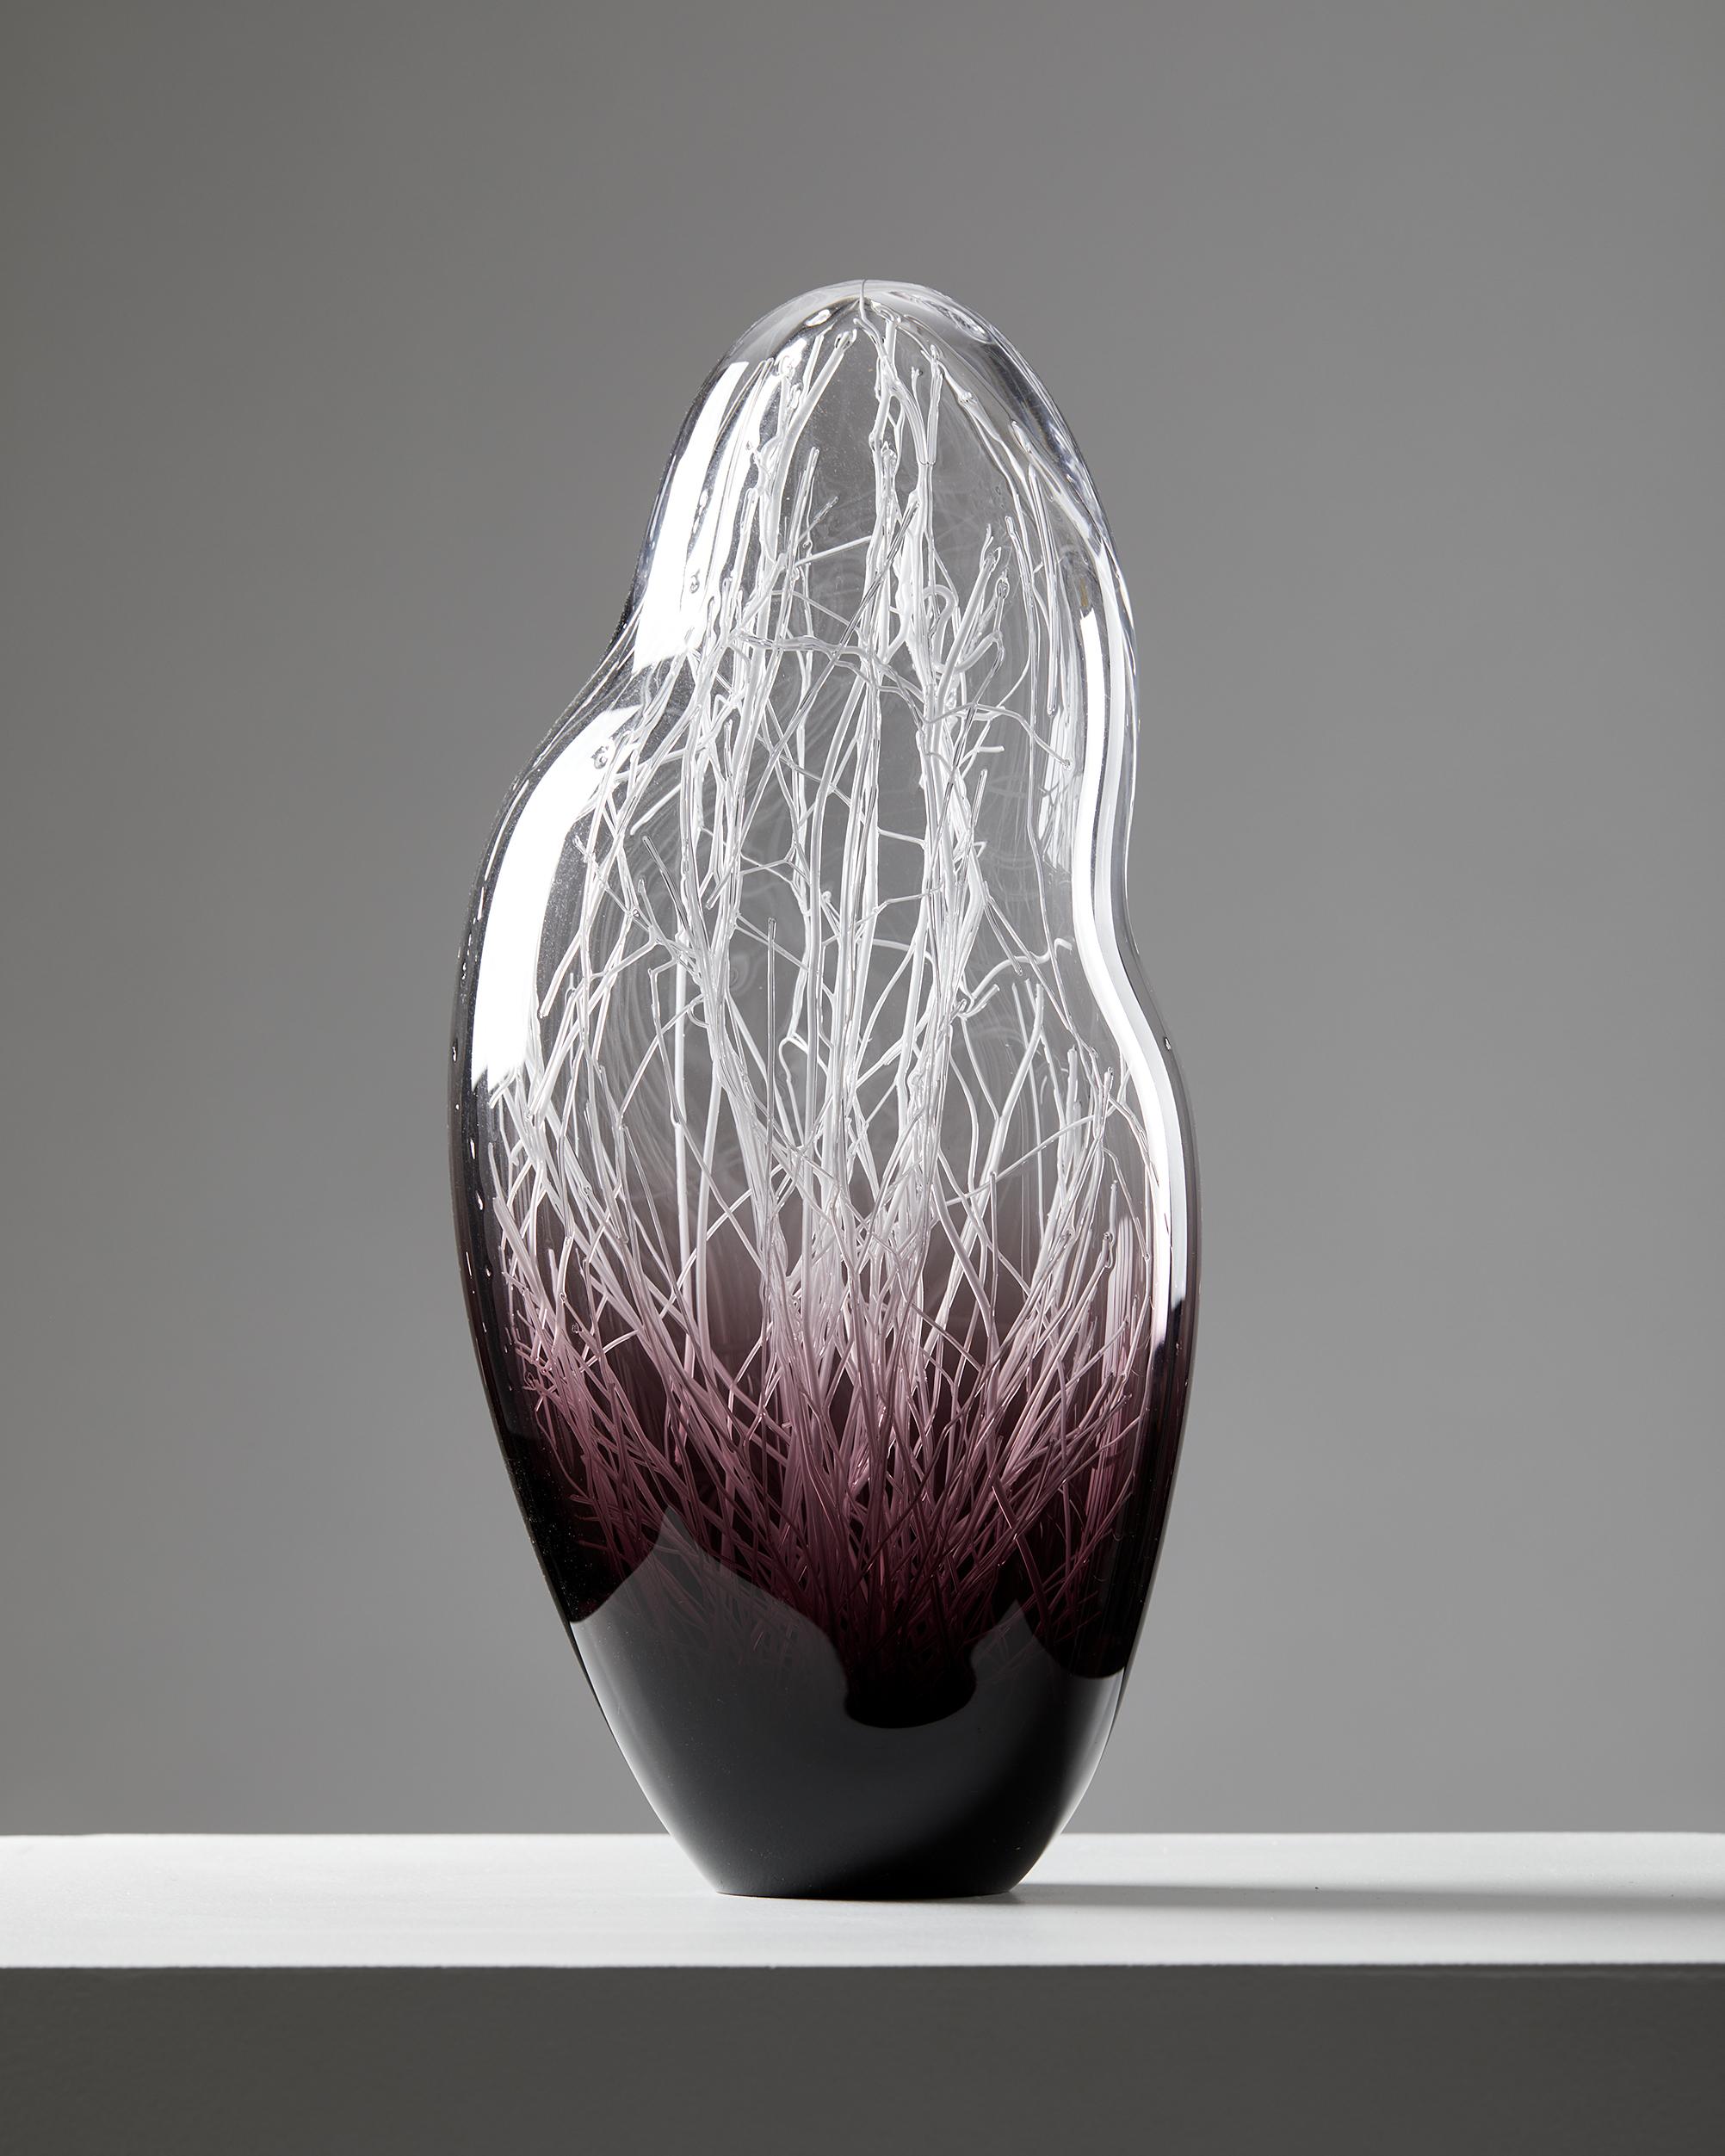 Modern Glass Sculpture “Penumbra” by Hanne Enemark and Louis Thompson